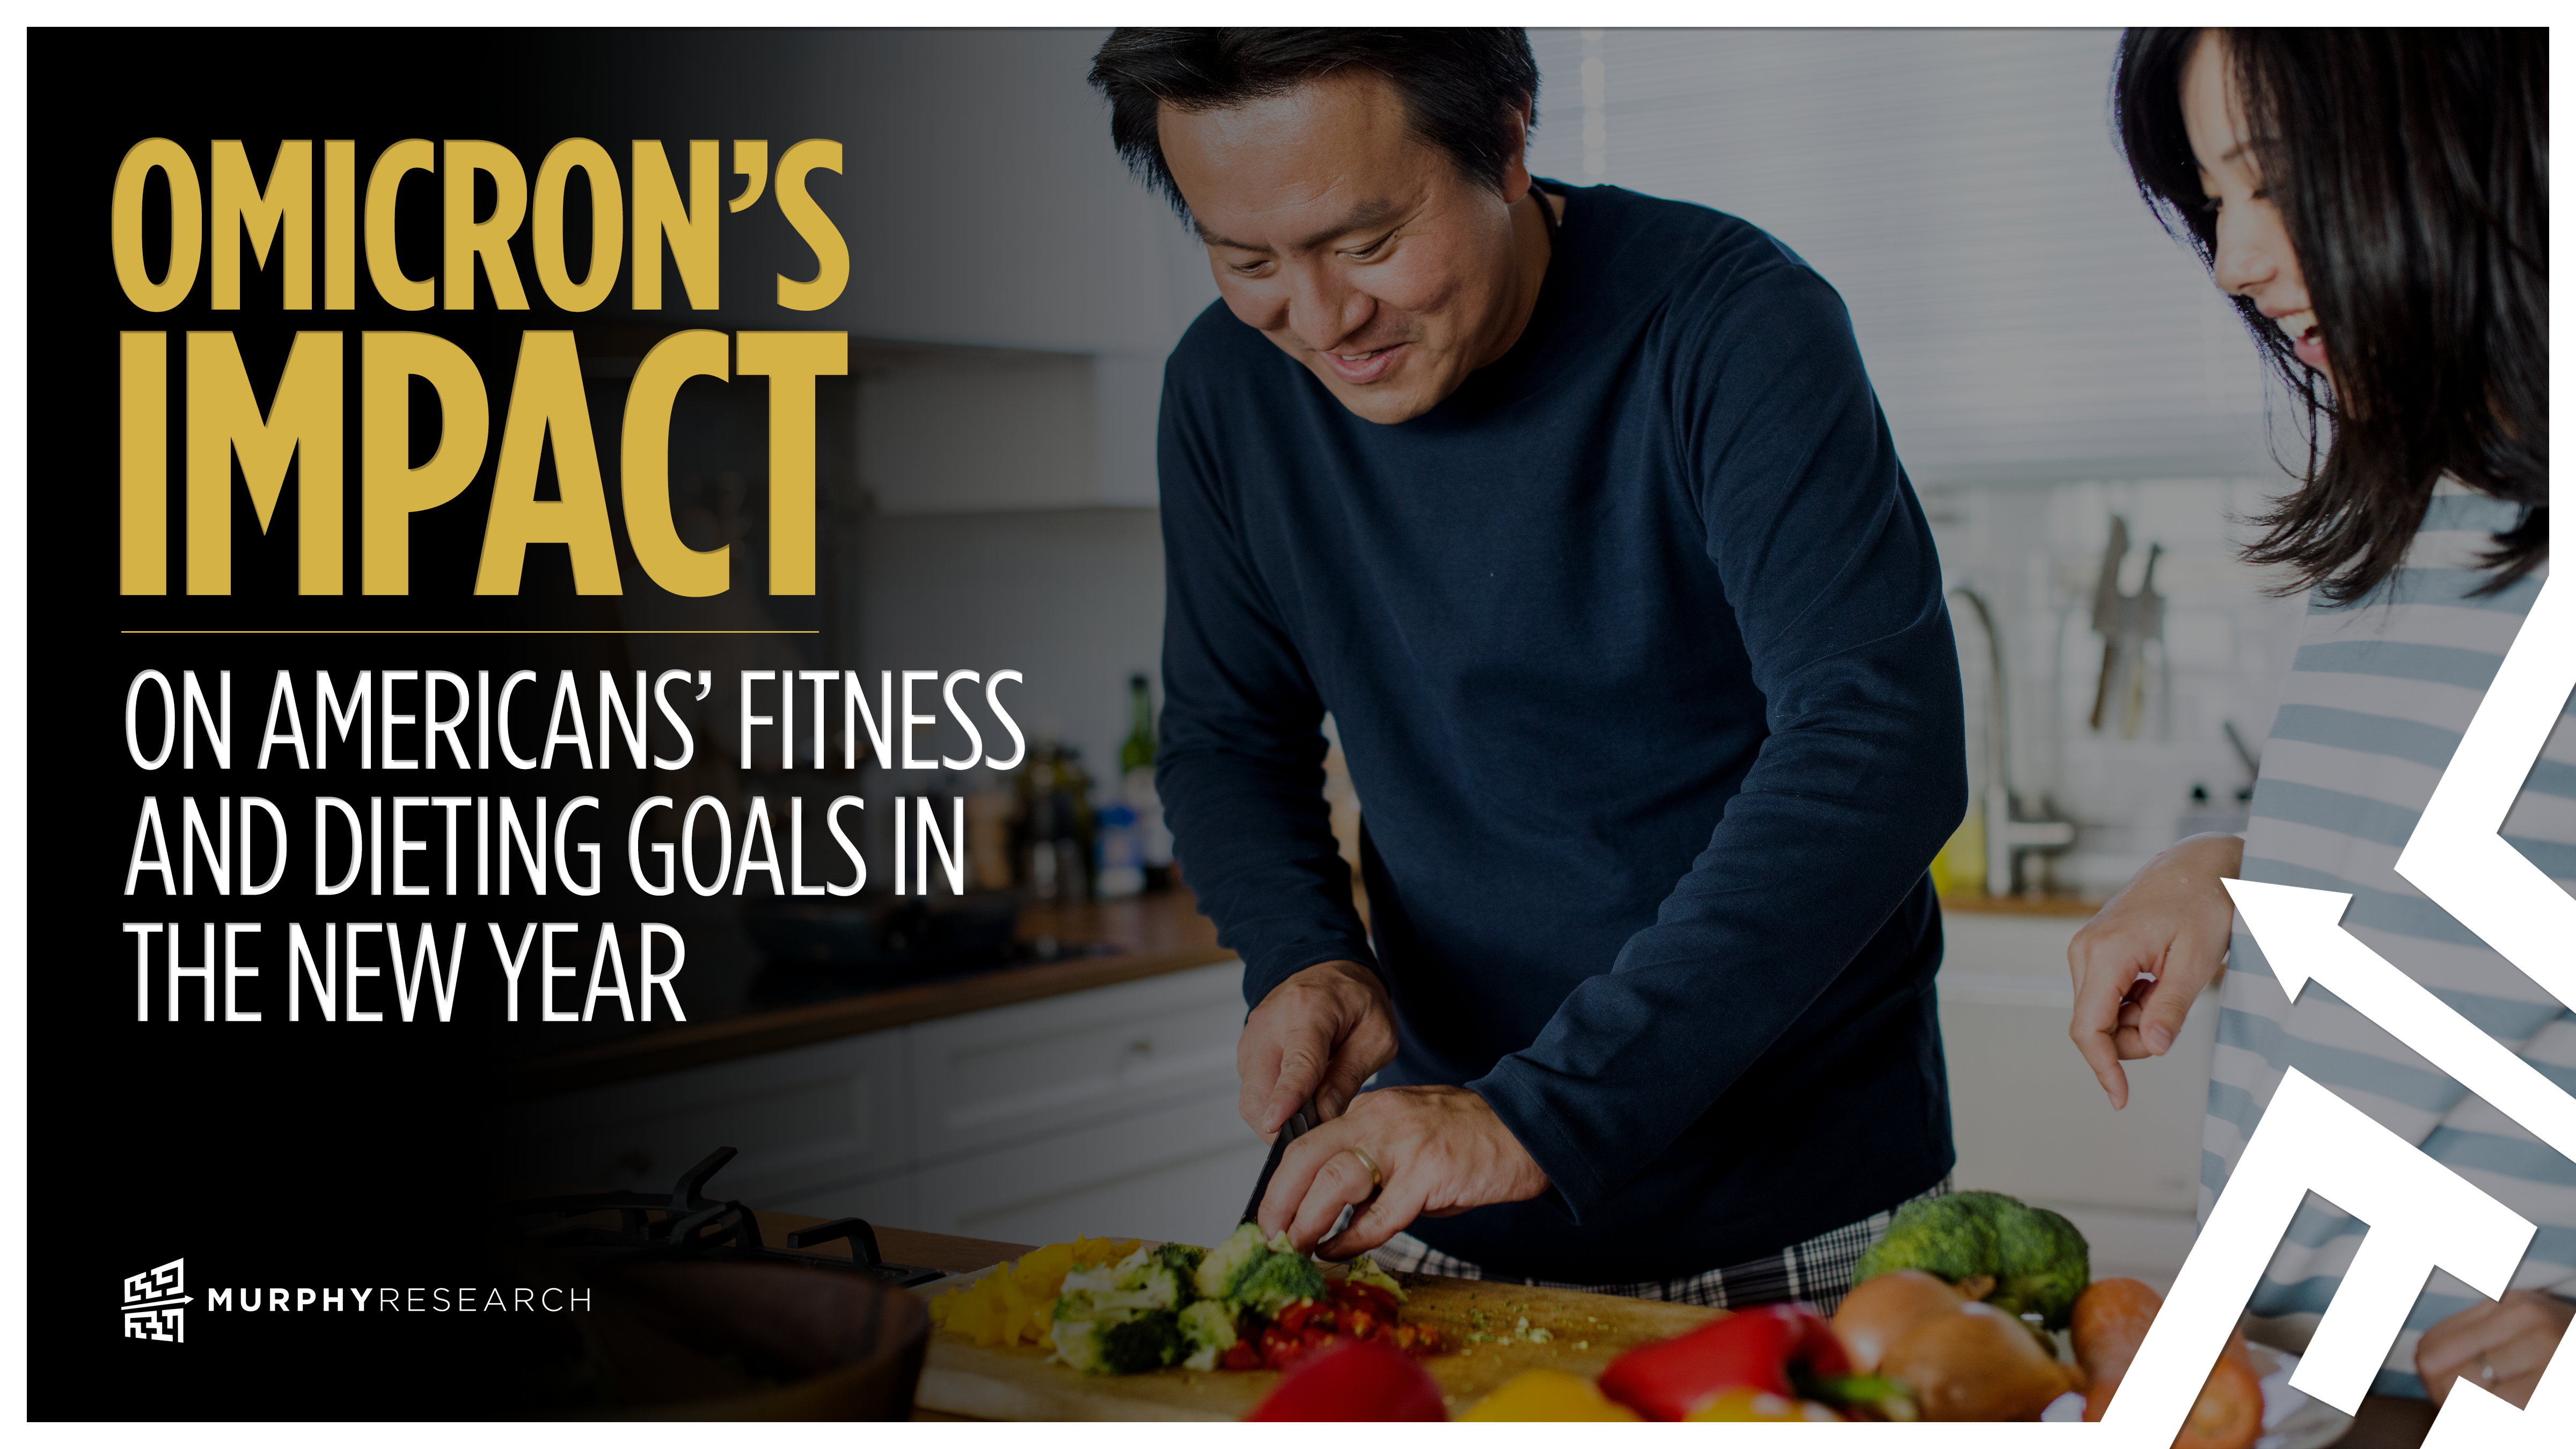 Omicron’s impact on Americans’ fitness and dieting goals